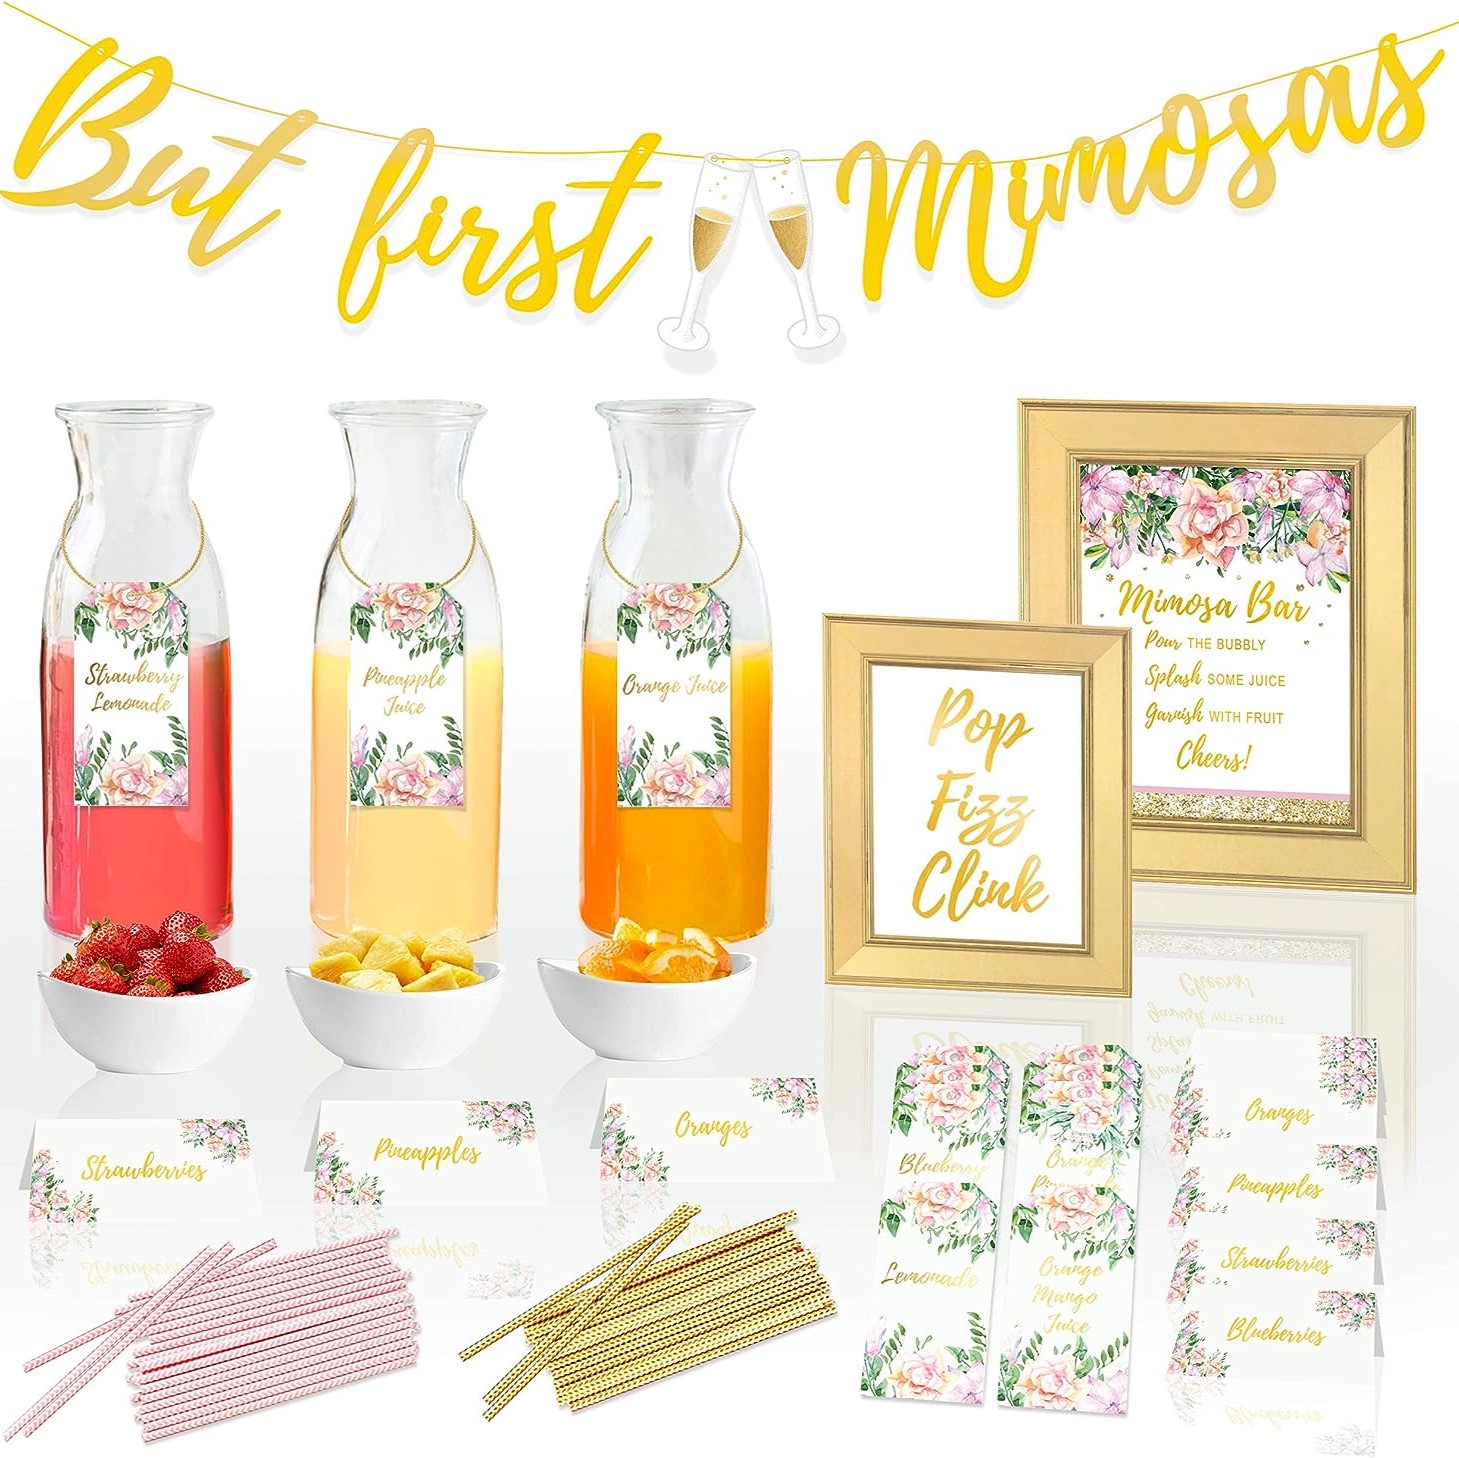 Content layout for a mimosa bar decorations kit. Included is a "But first mimosas" banner, two bar signs, printed drink tags, and paper straws.